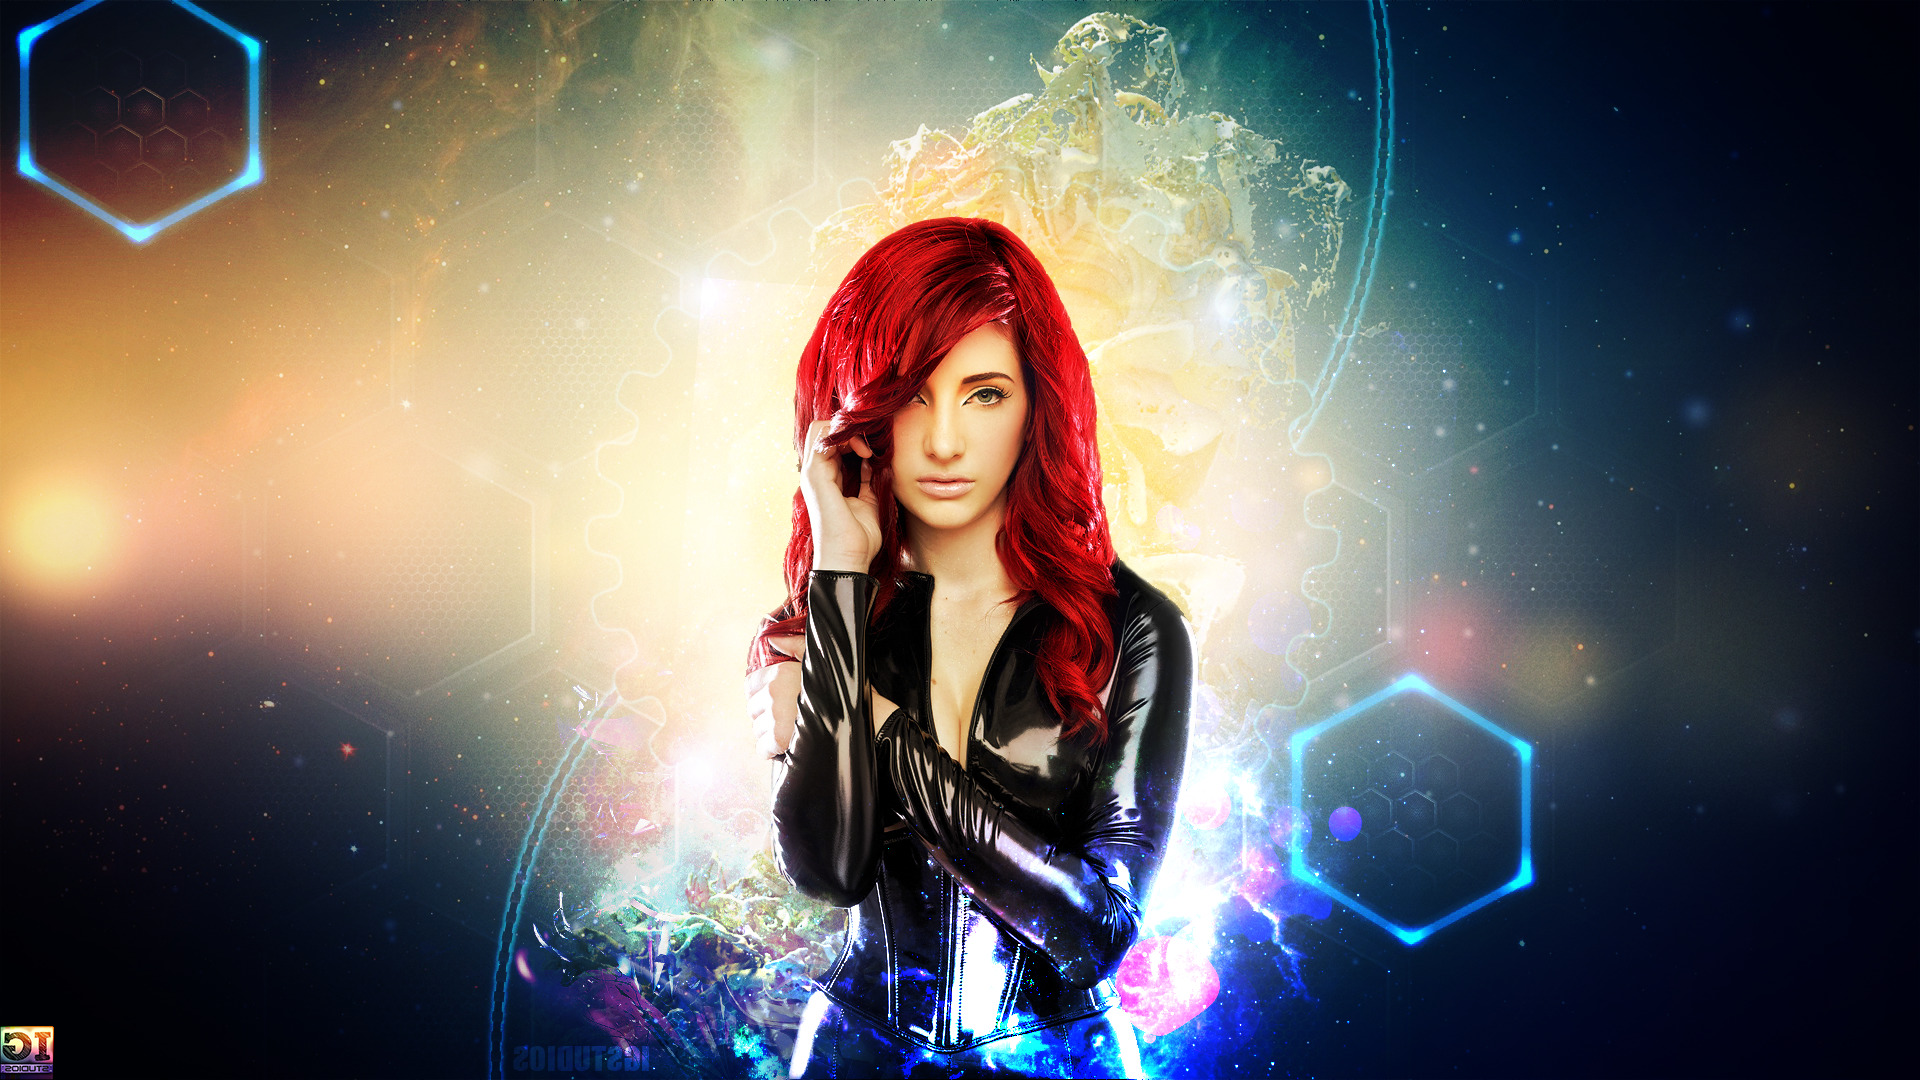 leather, Redhead, Women, Curly Hair, Space, Stars, Glowing Wallpaper